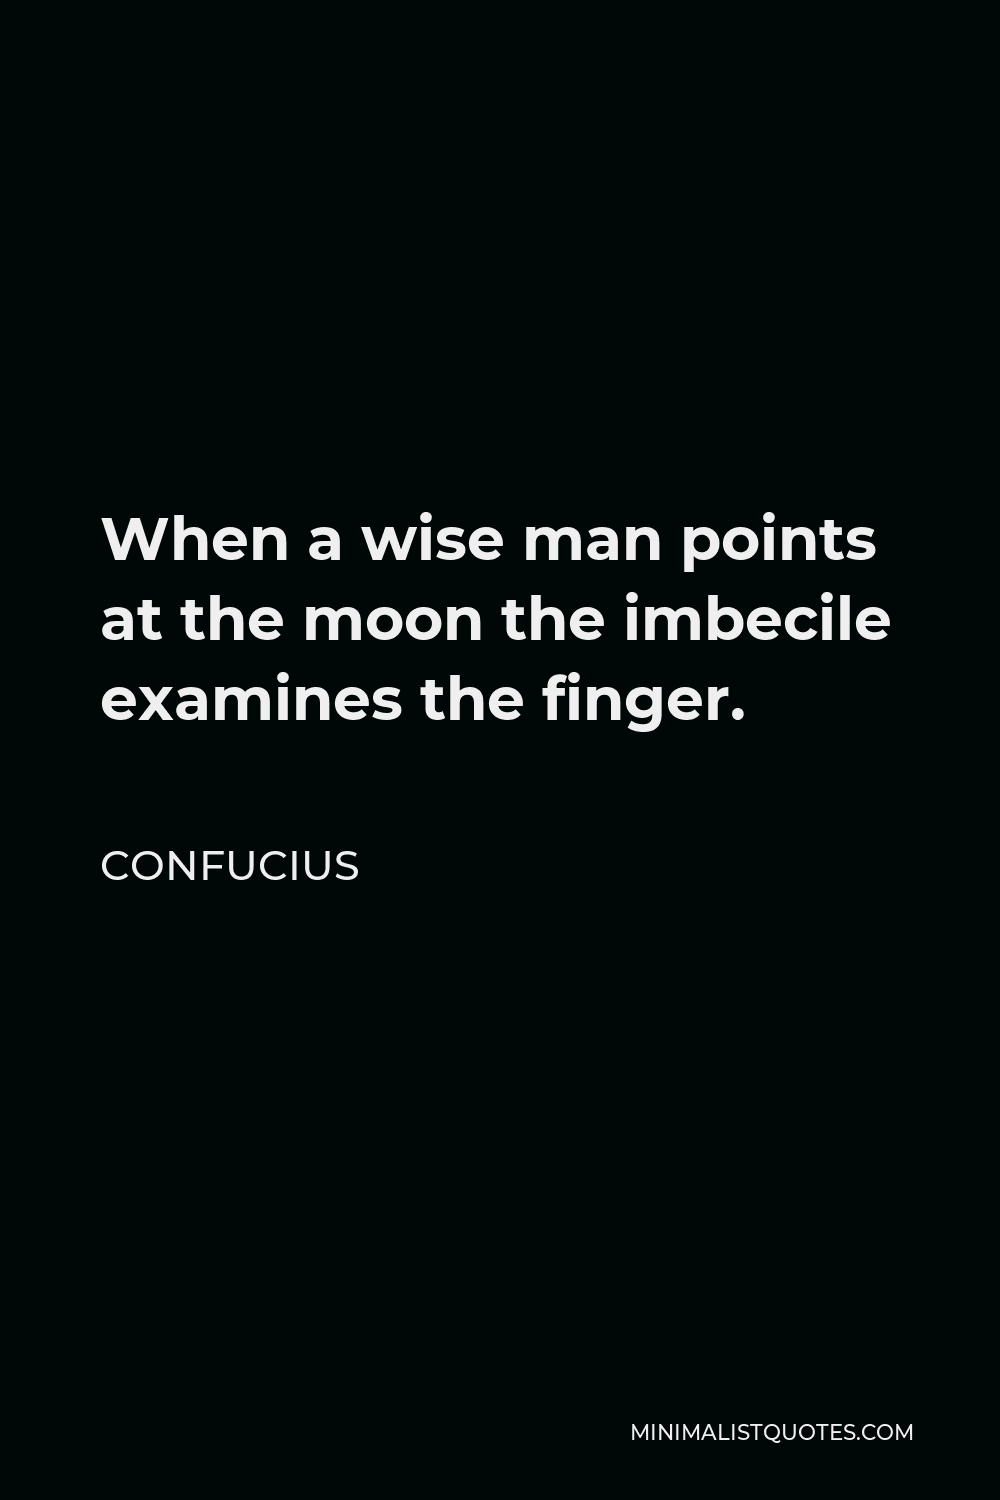 Confucius Quote - When a wise man points at the moon the imbecile examines the finger.